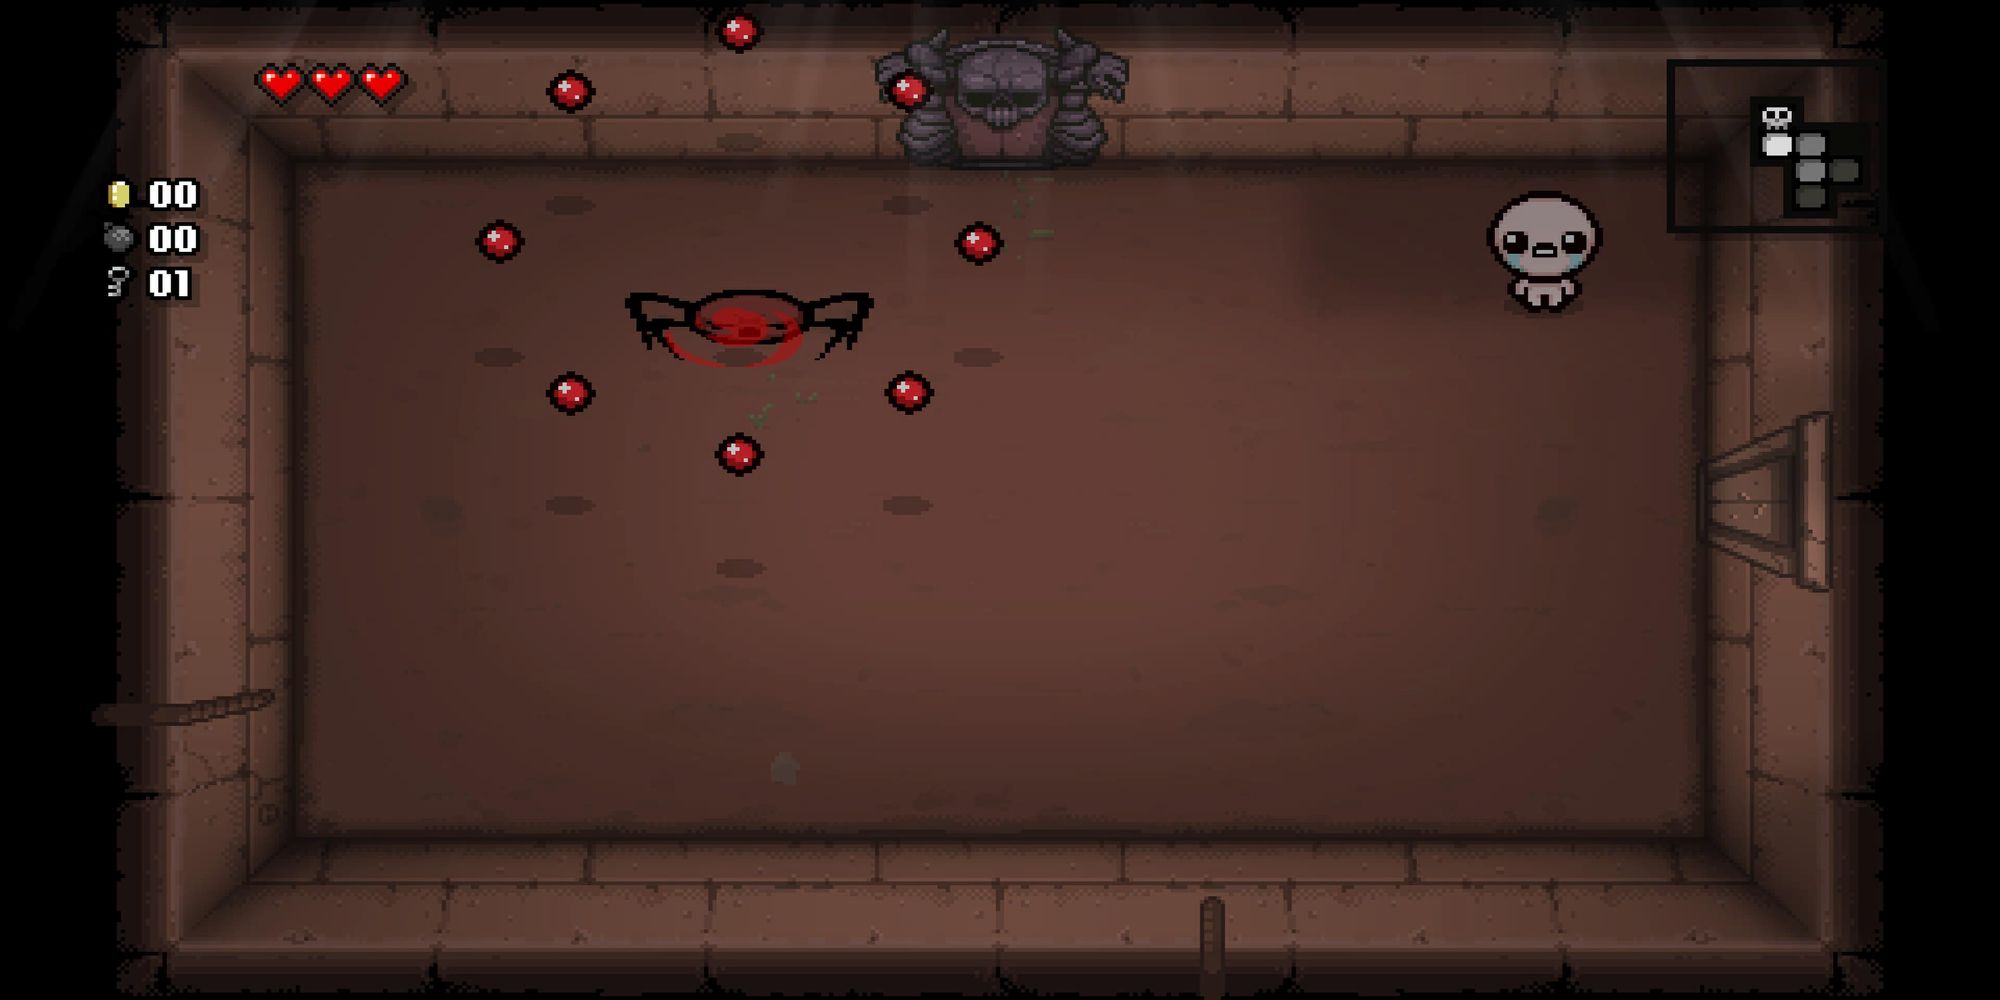 The Binding Of Isaac Blood spider attacking